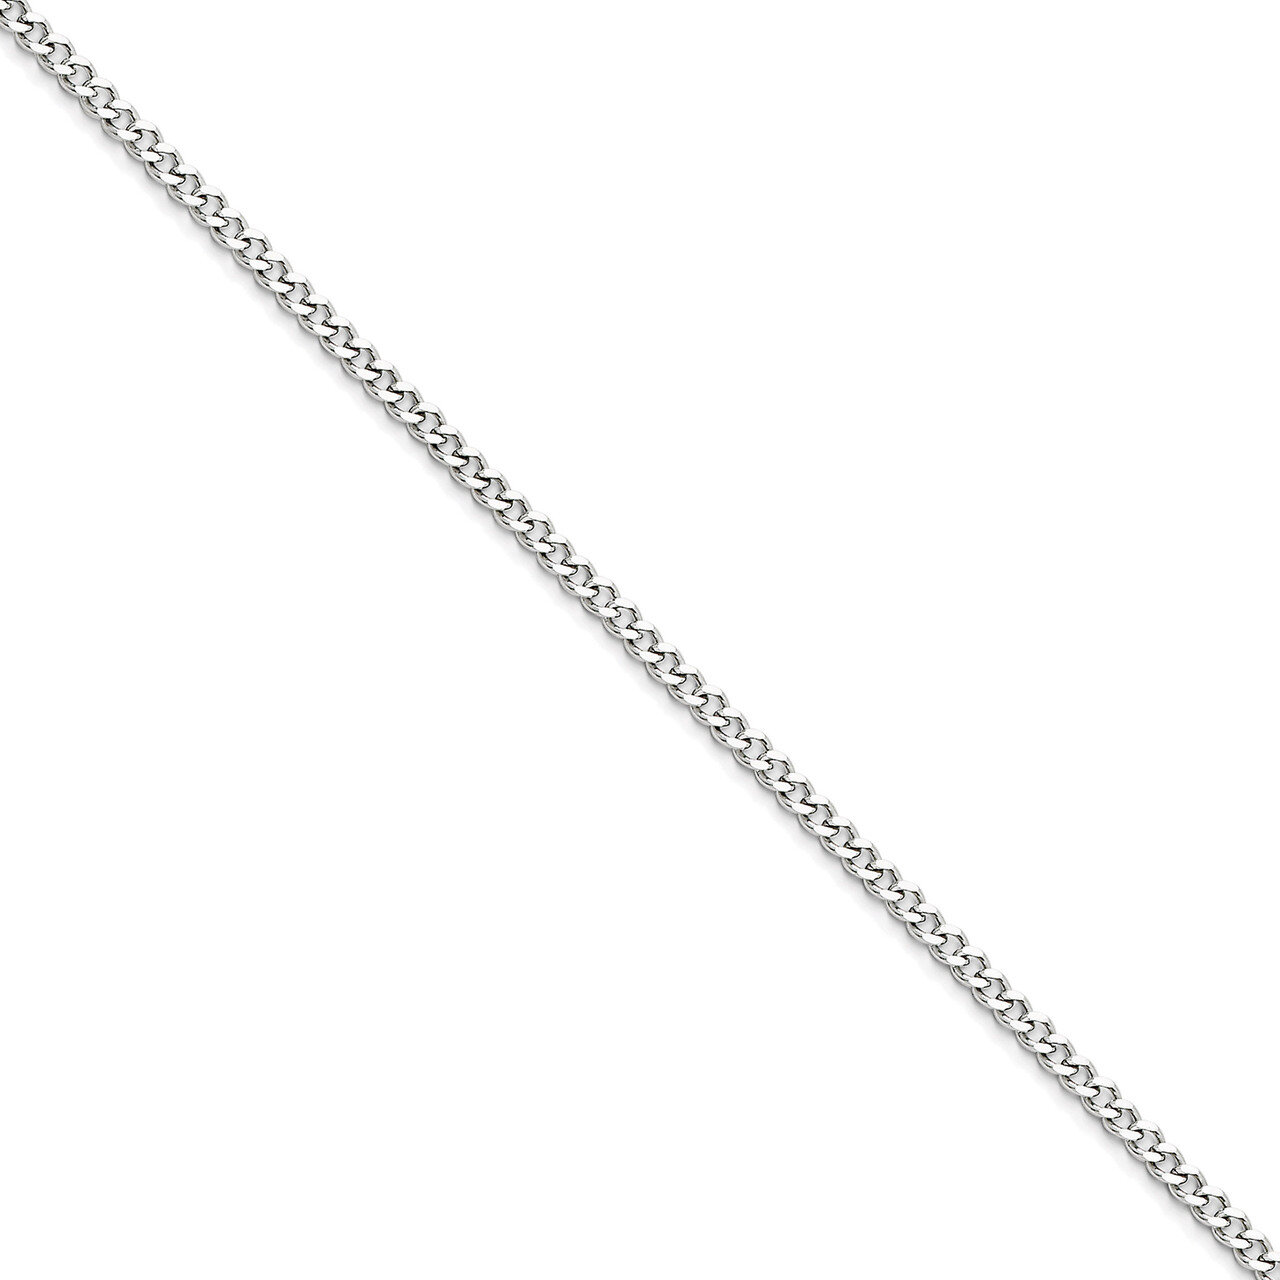 3.0mm 16 Inch Curb Chain - Stainless Steel SRN688